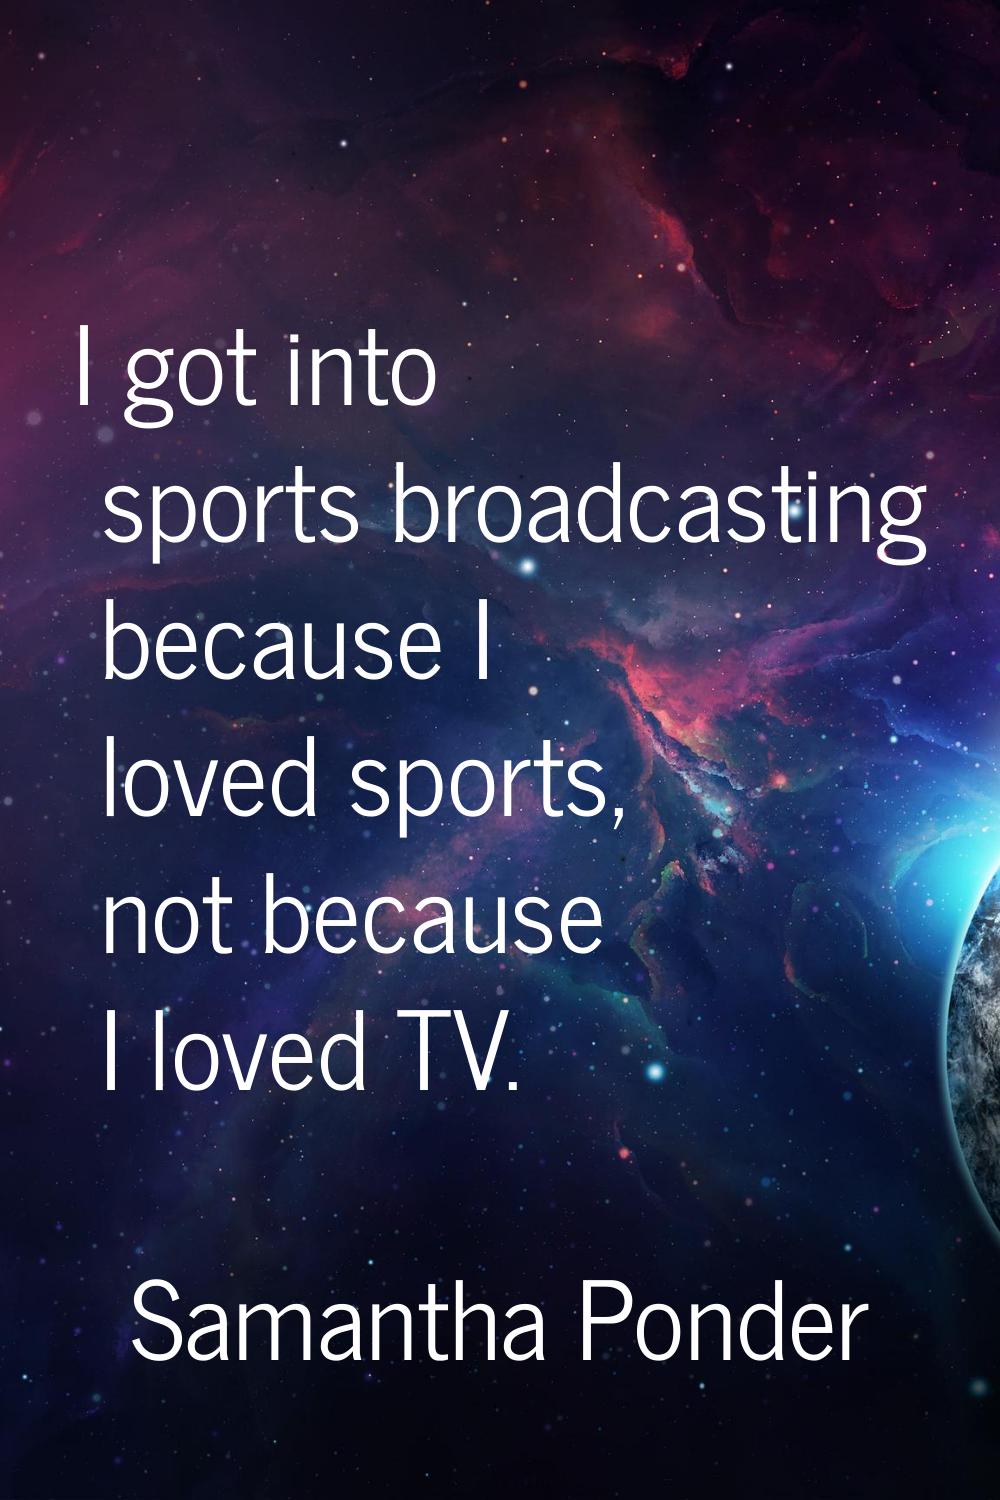 I got into sports broadcasting because I loved sports, not because I loved TV.